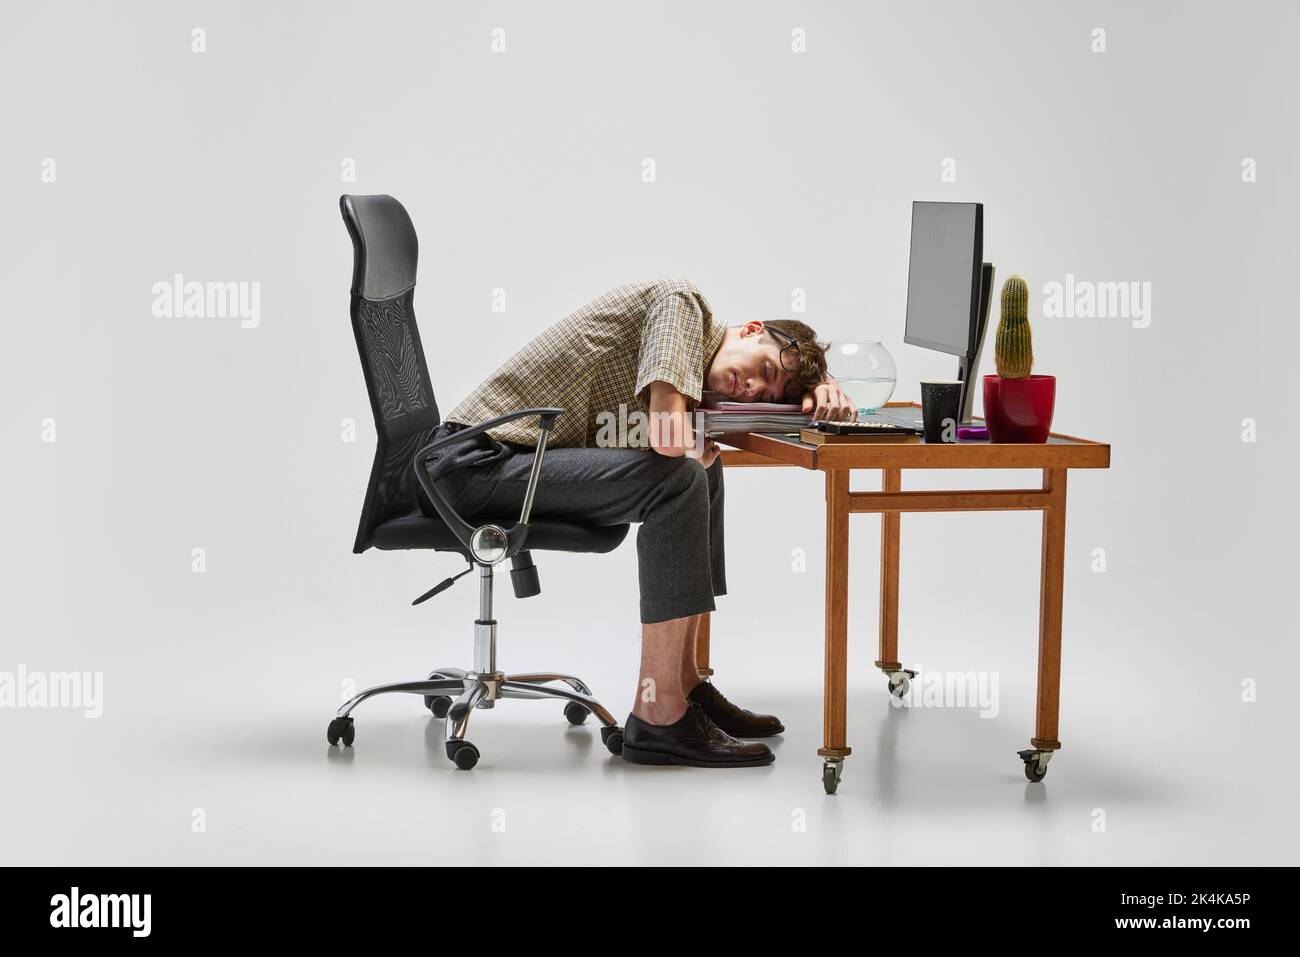 Napping. Young man, student sitting at computer desk and sleeping after hard day. Business, studying, education, youth, remote workplace concept Stock Photo